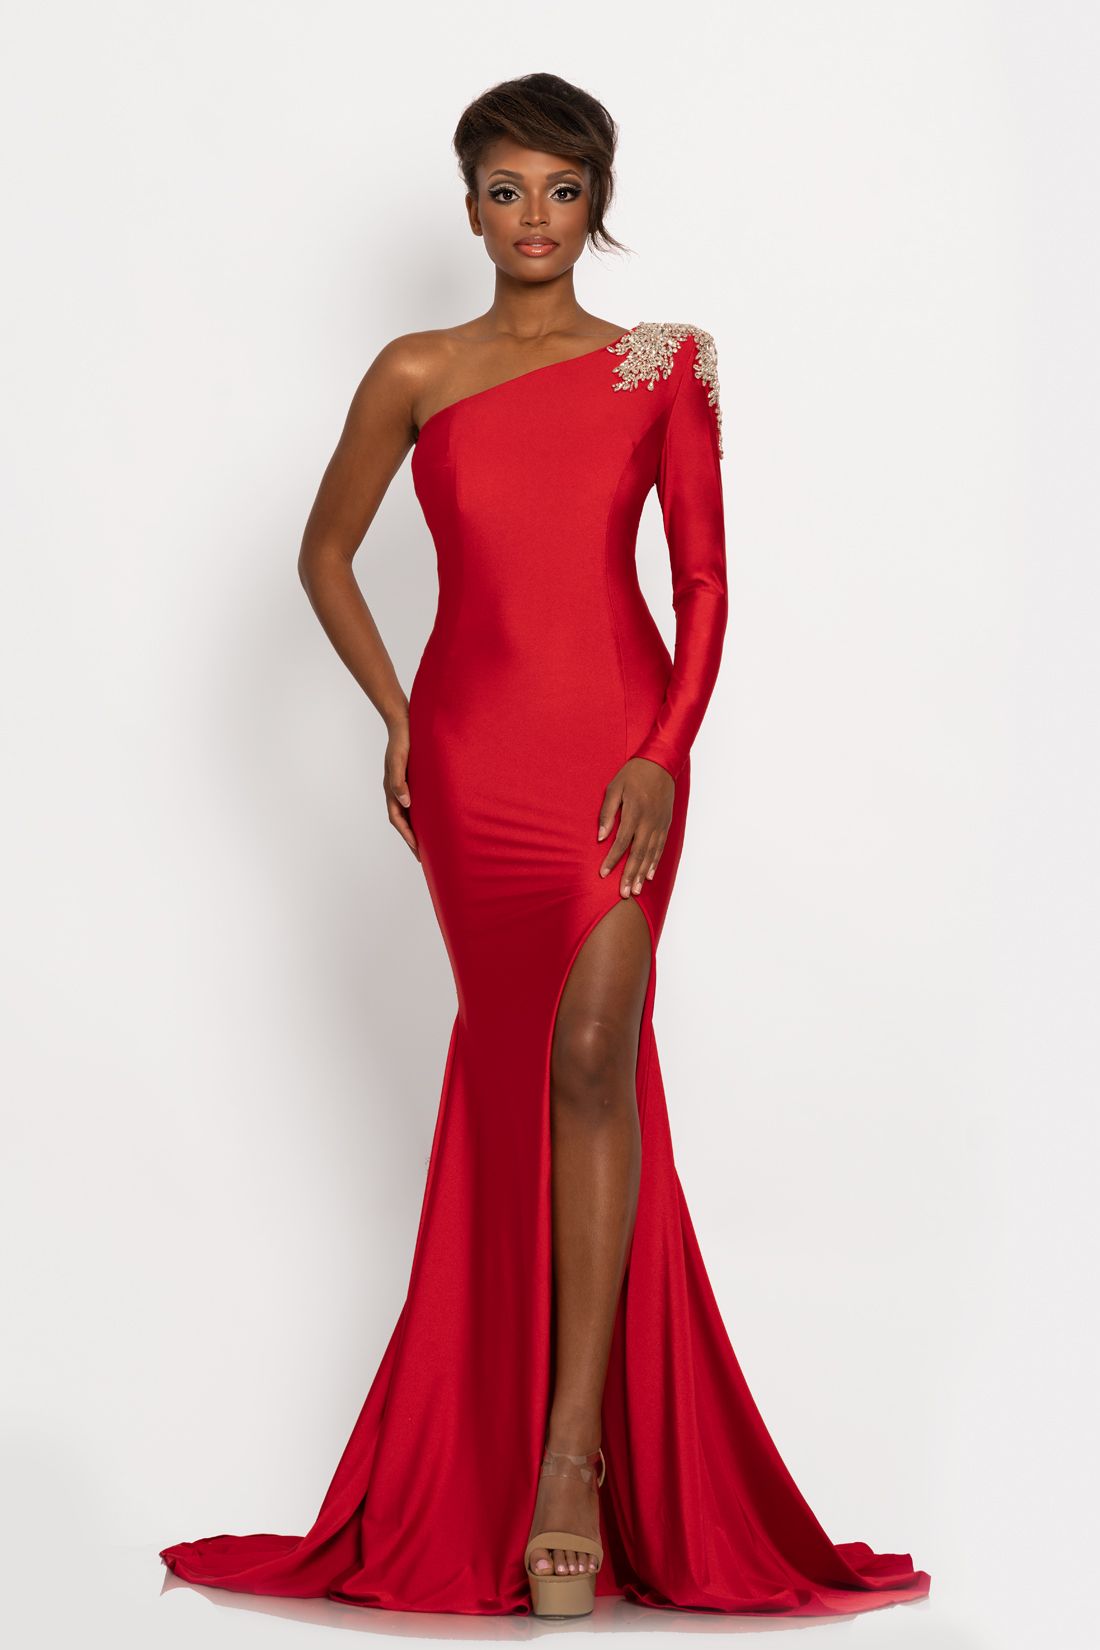 Johnathan Kayne 2224 One long sleeve fitted prom dress with embellishments on the shoulder.  This fitted long pageant gown has a high slit.  Colors  Black, Hot Pink,  Royal, Red  Sizes  00, 0, 2, 4, 6, 8, 10, 12, 14, 16, 18, 20, 22, 24